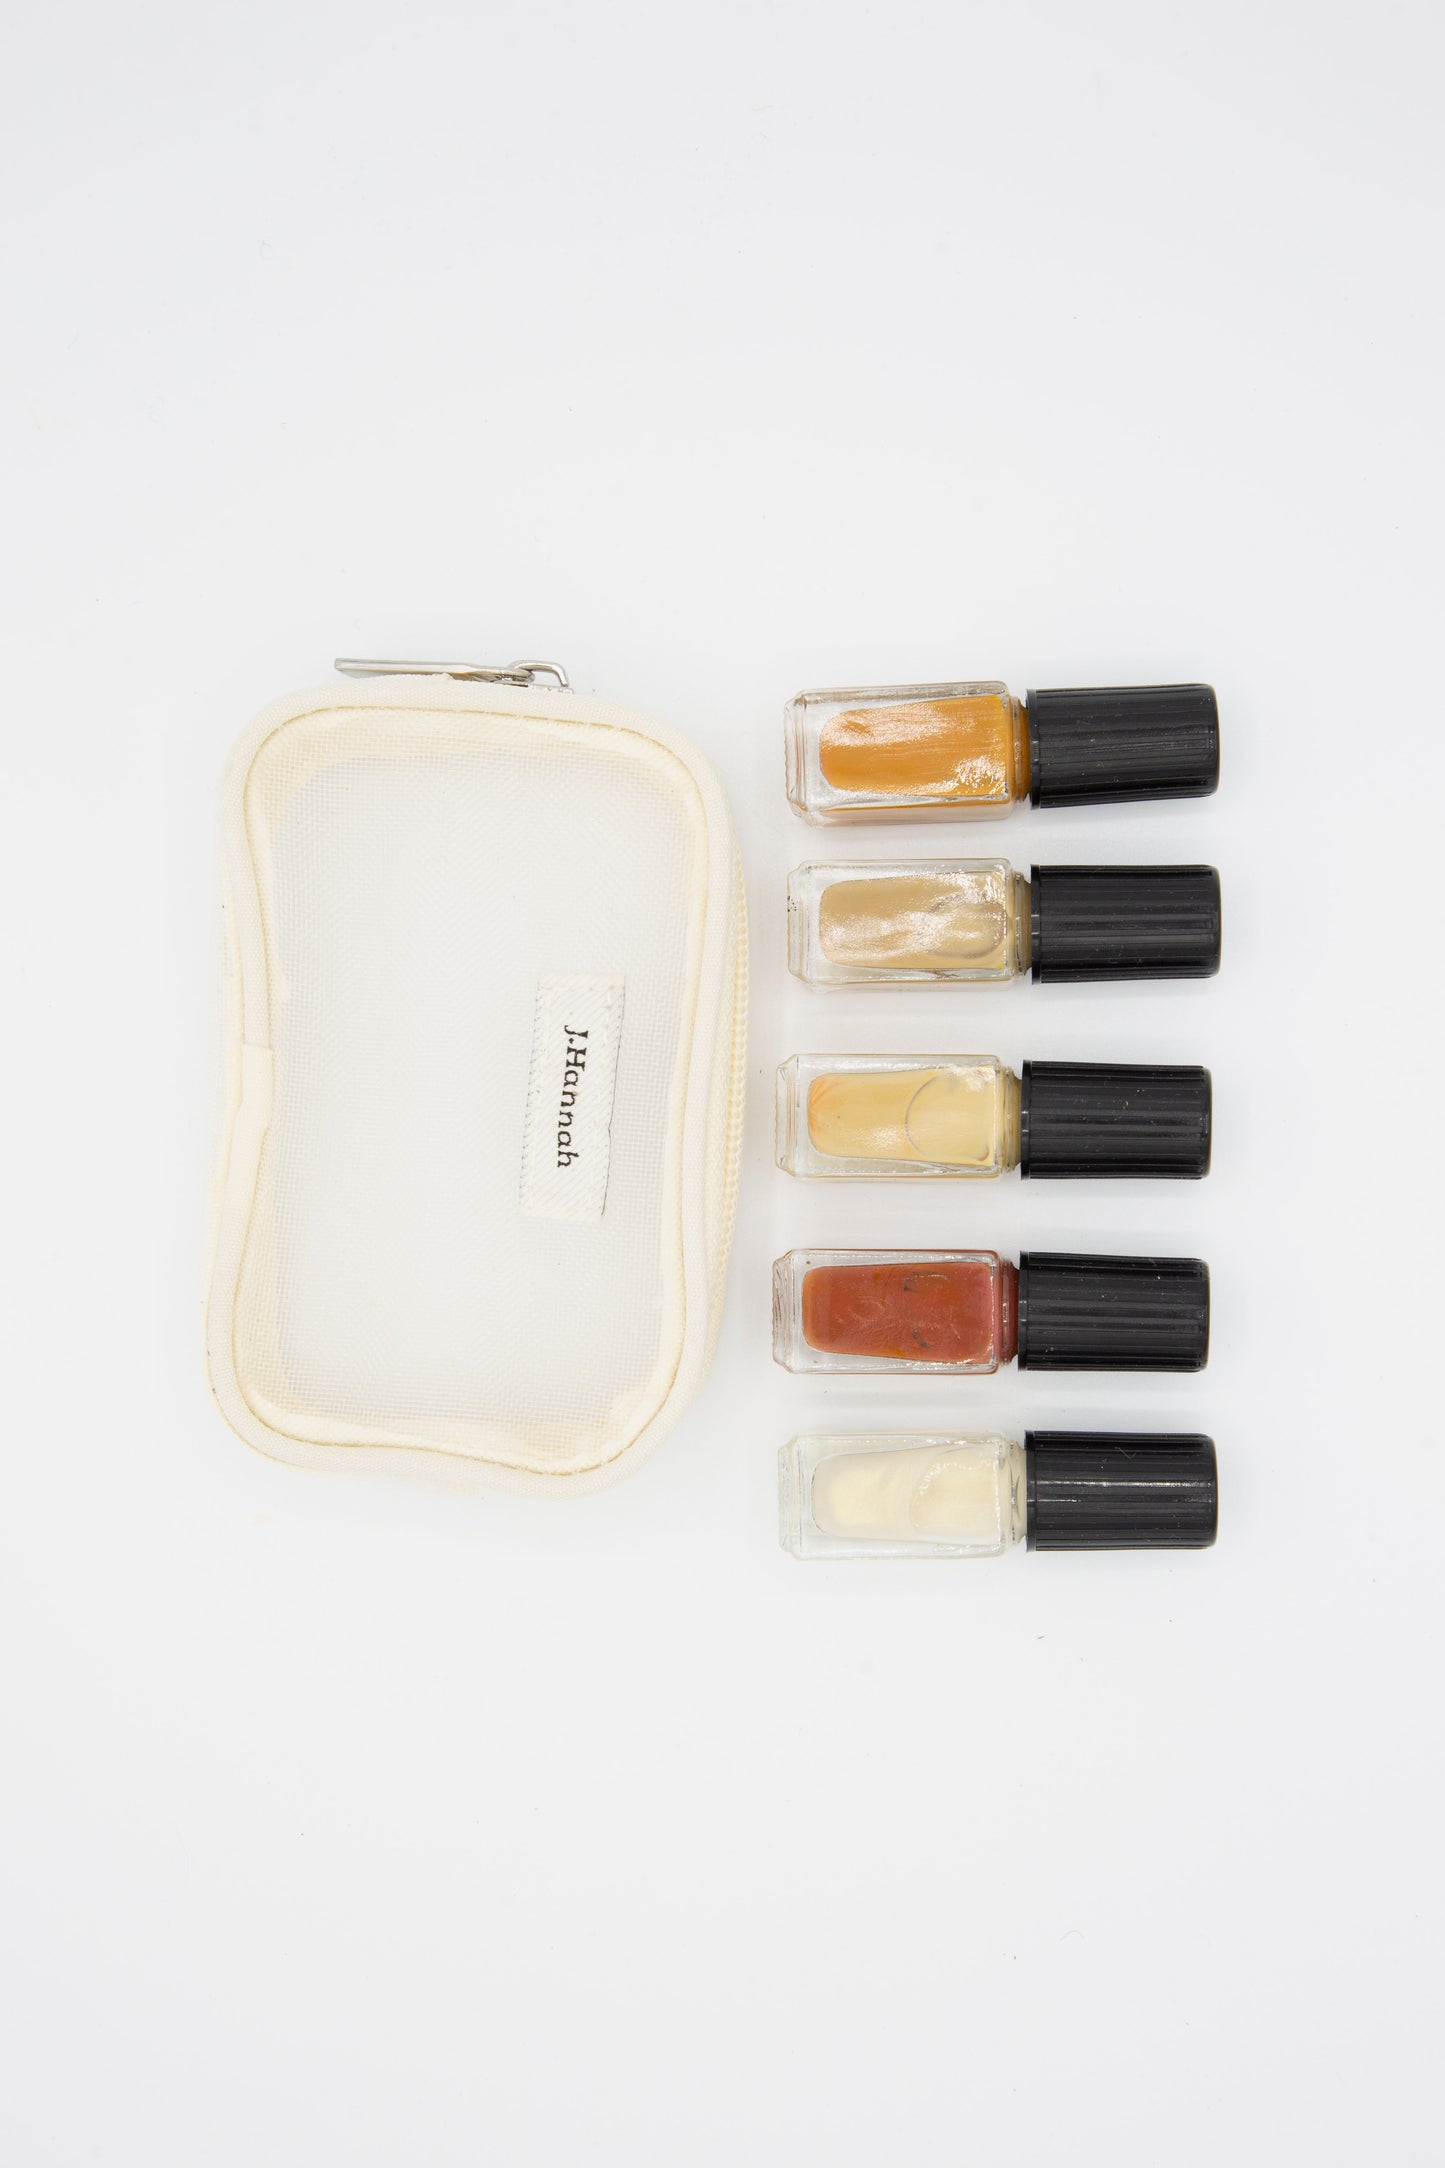 A small pouch with a Mini Polish Set in Classics by J Hannah, consisting of high quality lipsticks and lip balms.